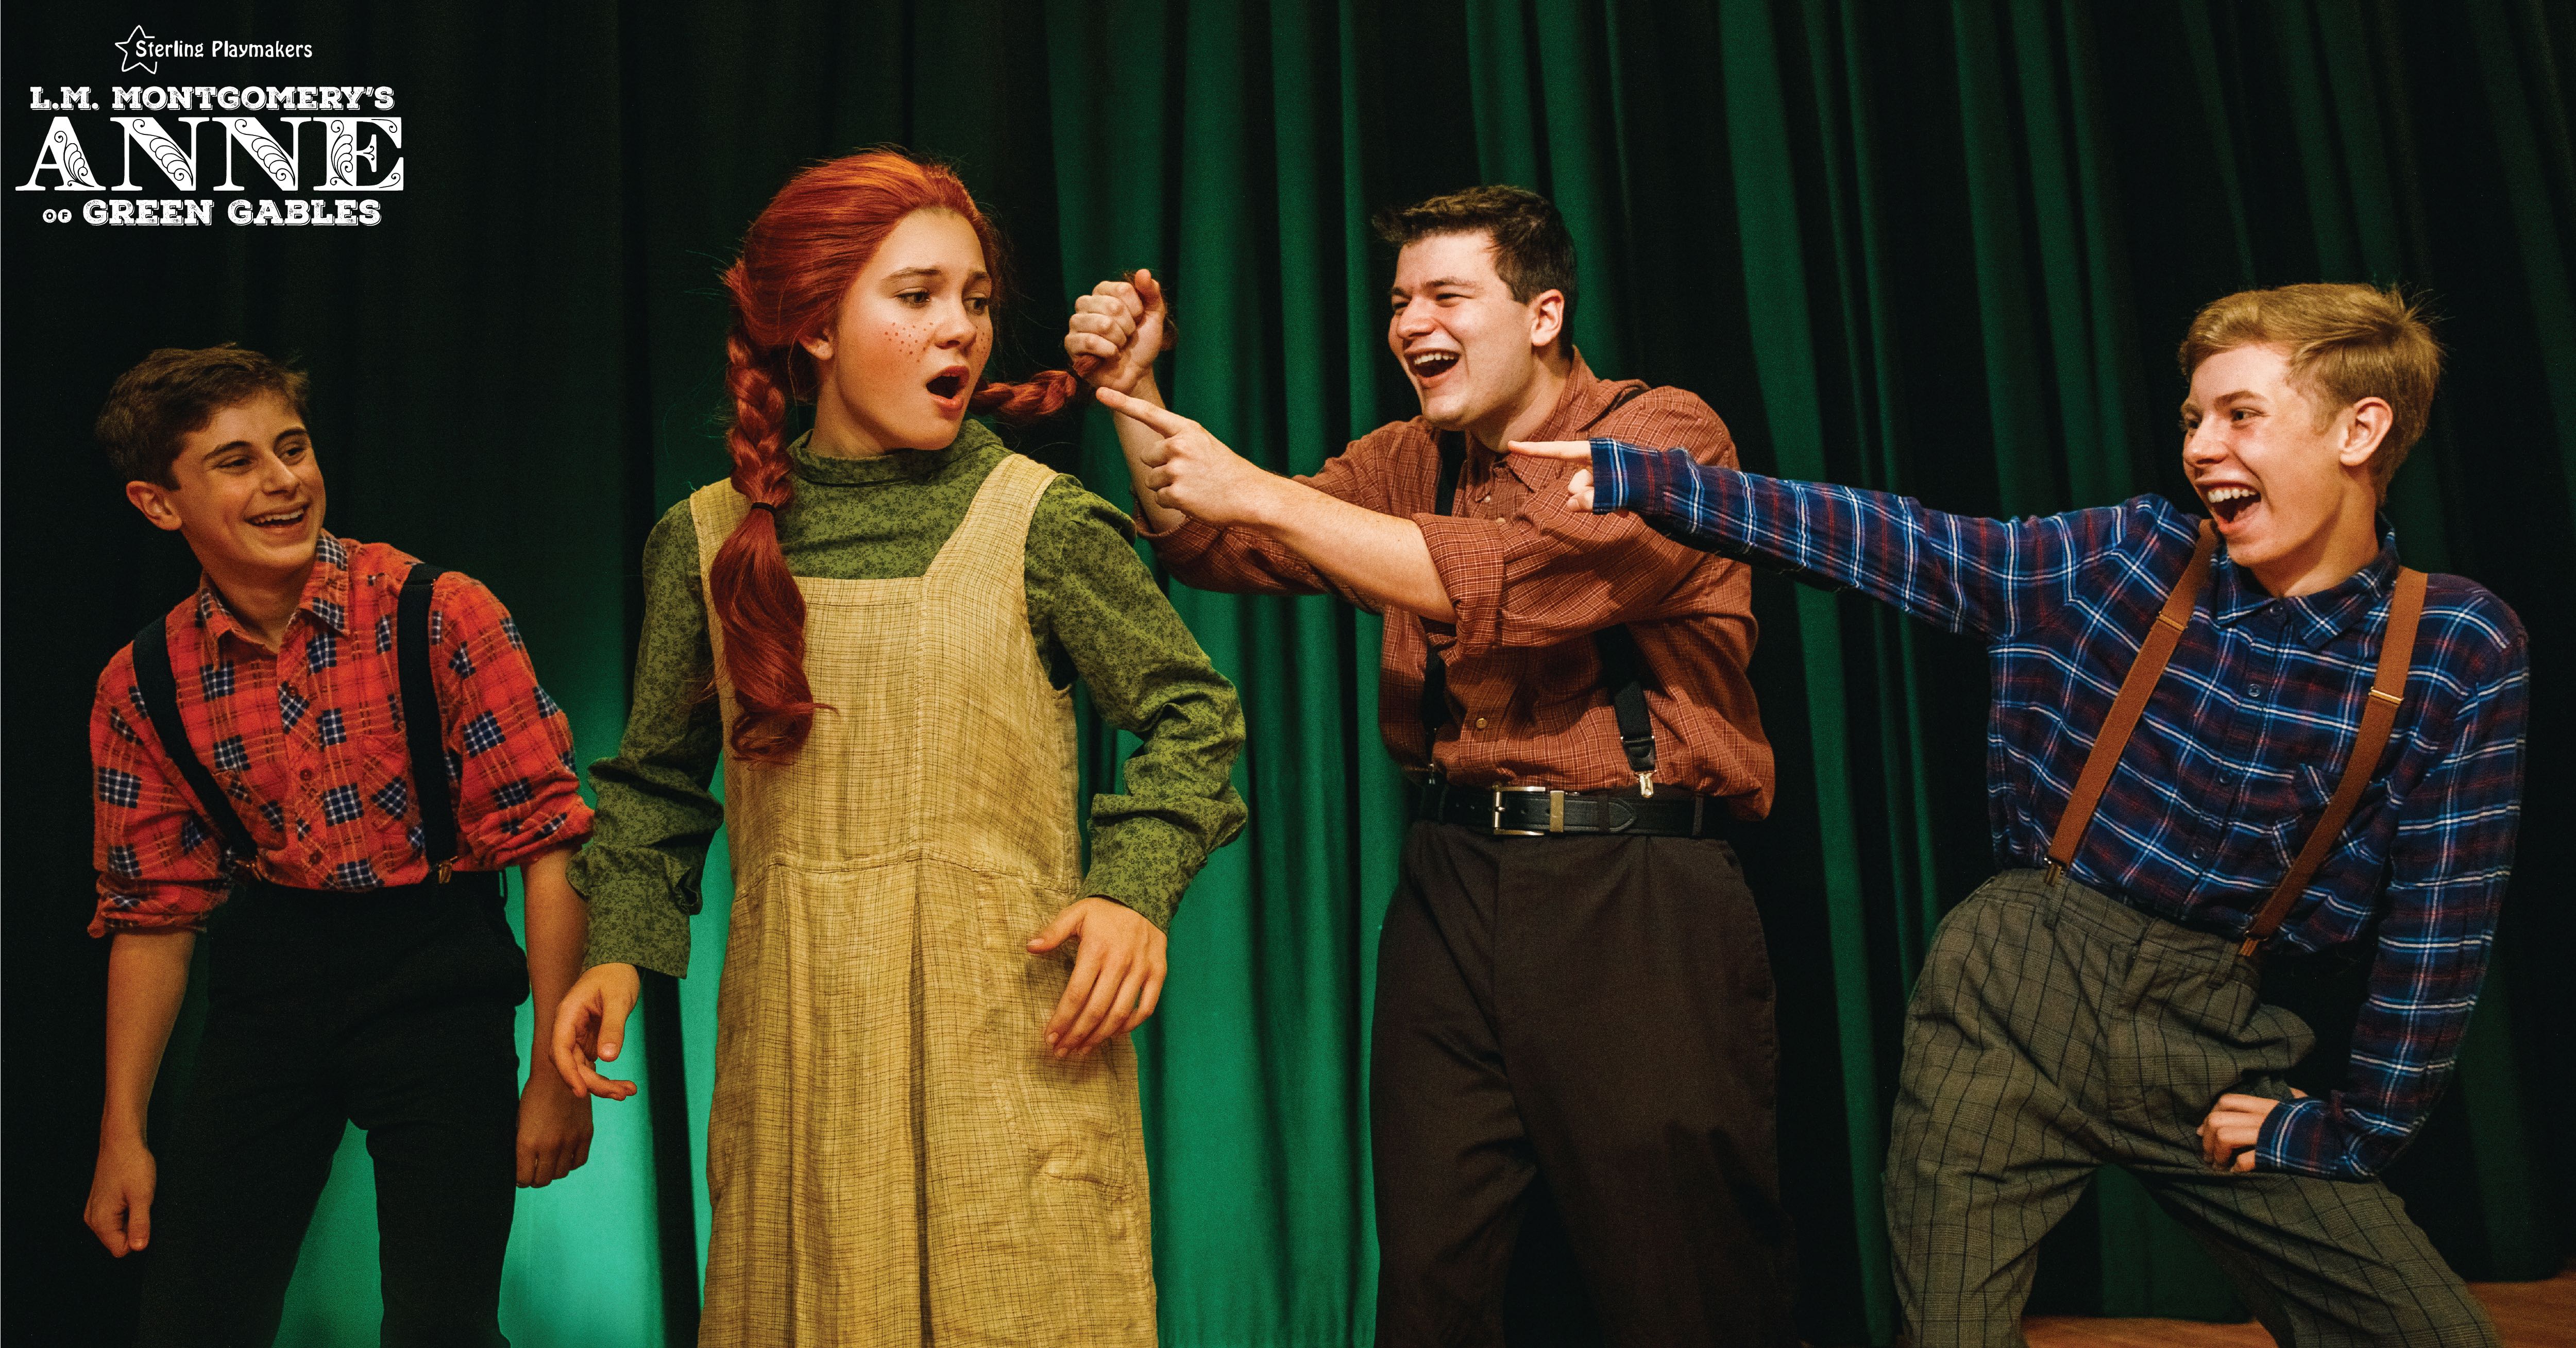 The boys at Avonlea School pick on Anne Shirley for her red hair. Photo by Iryna Photography